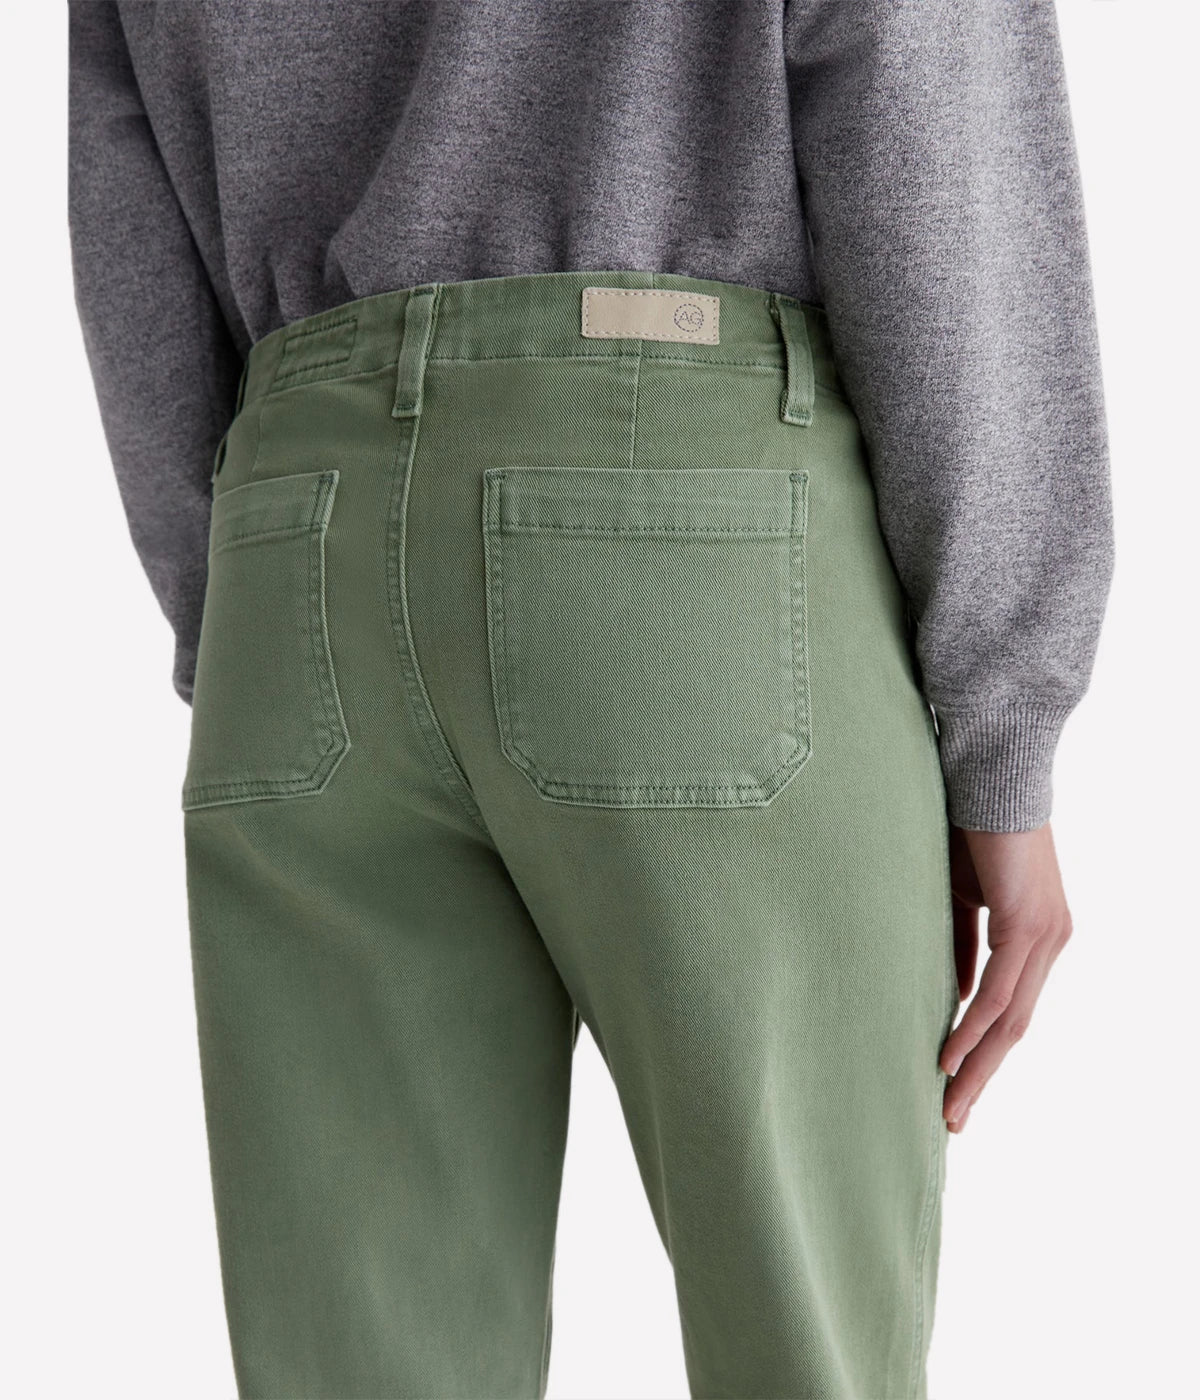 Analeigh High-Rise Straight Crop Jean in Sulfur Forest Pike